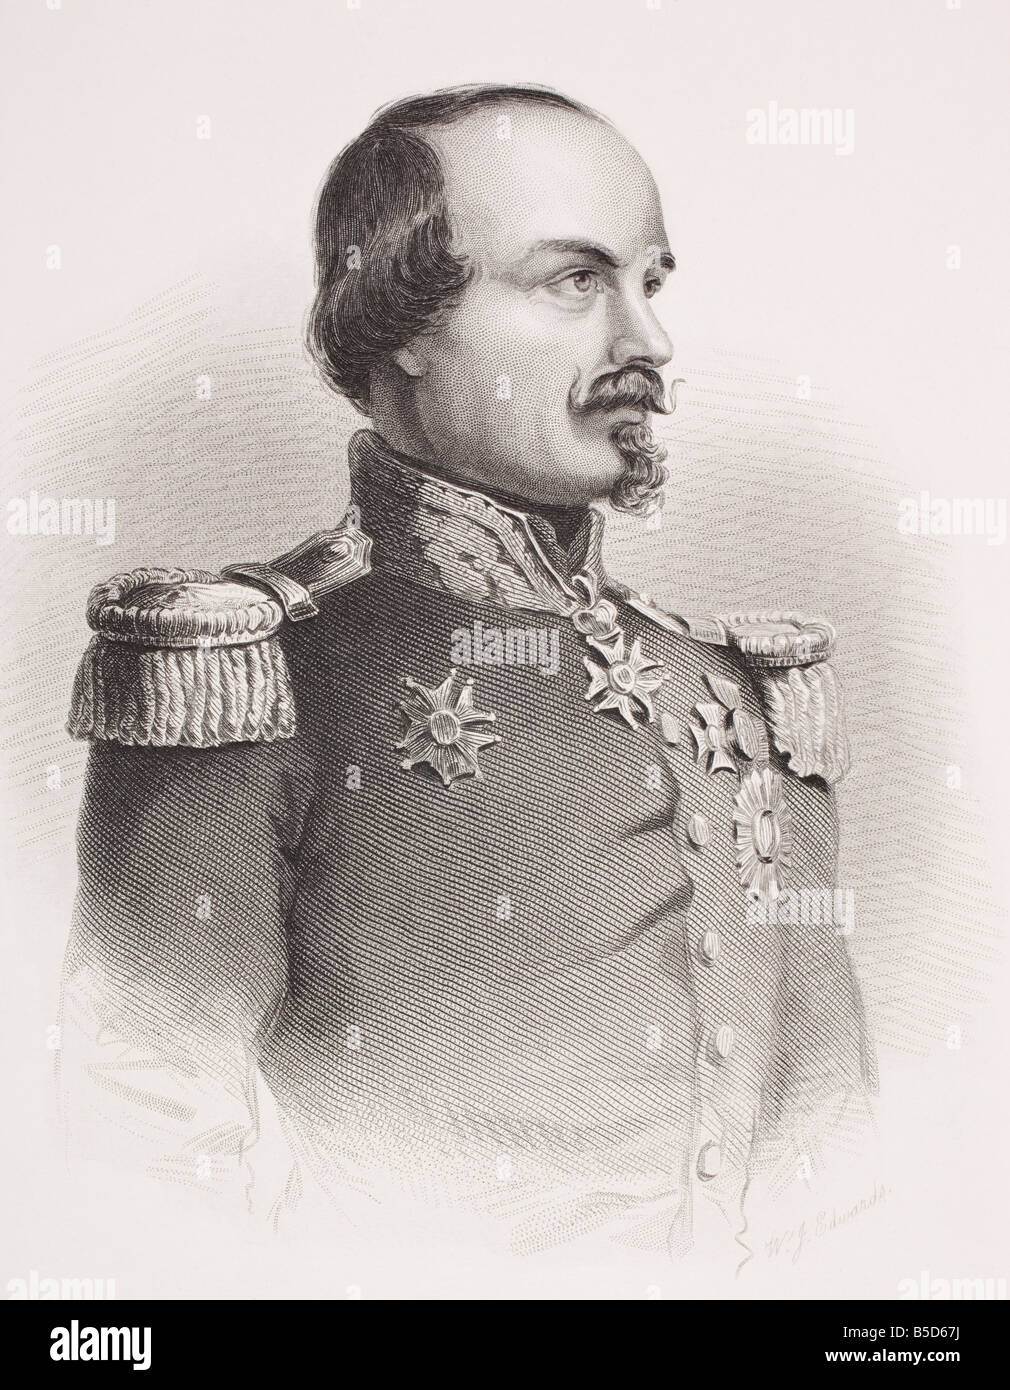 Francois Certain Canrobert, 1809 - 1895. Marshal of France. From the book Gallery of Historical Portraits, published c.1880. Stock Photo